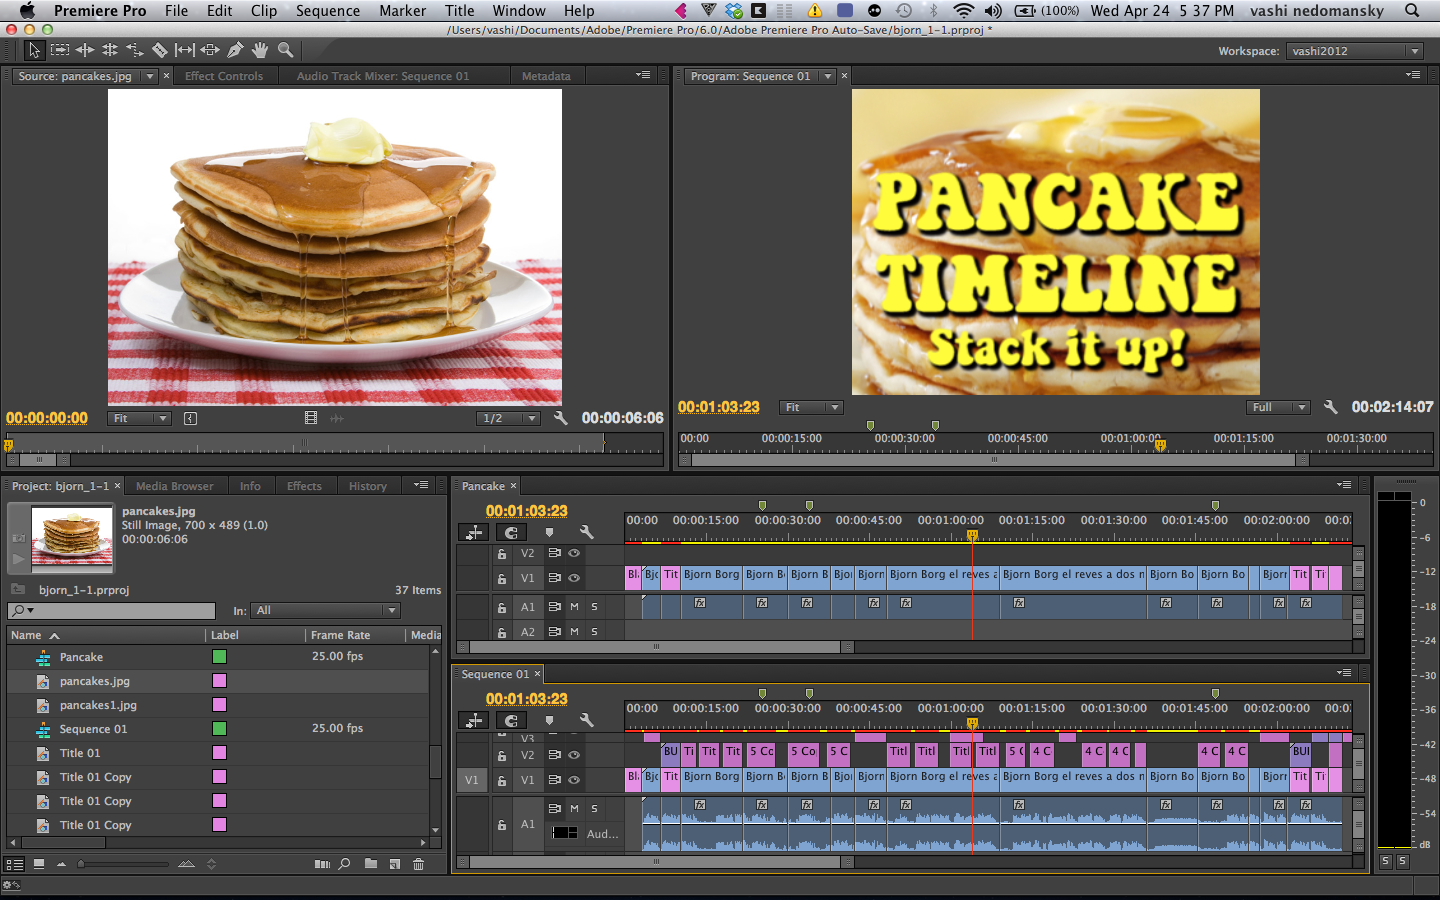 Using the pancake timeline in your edit